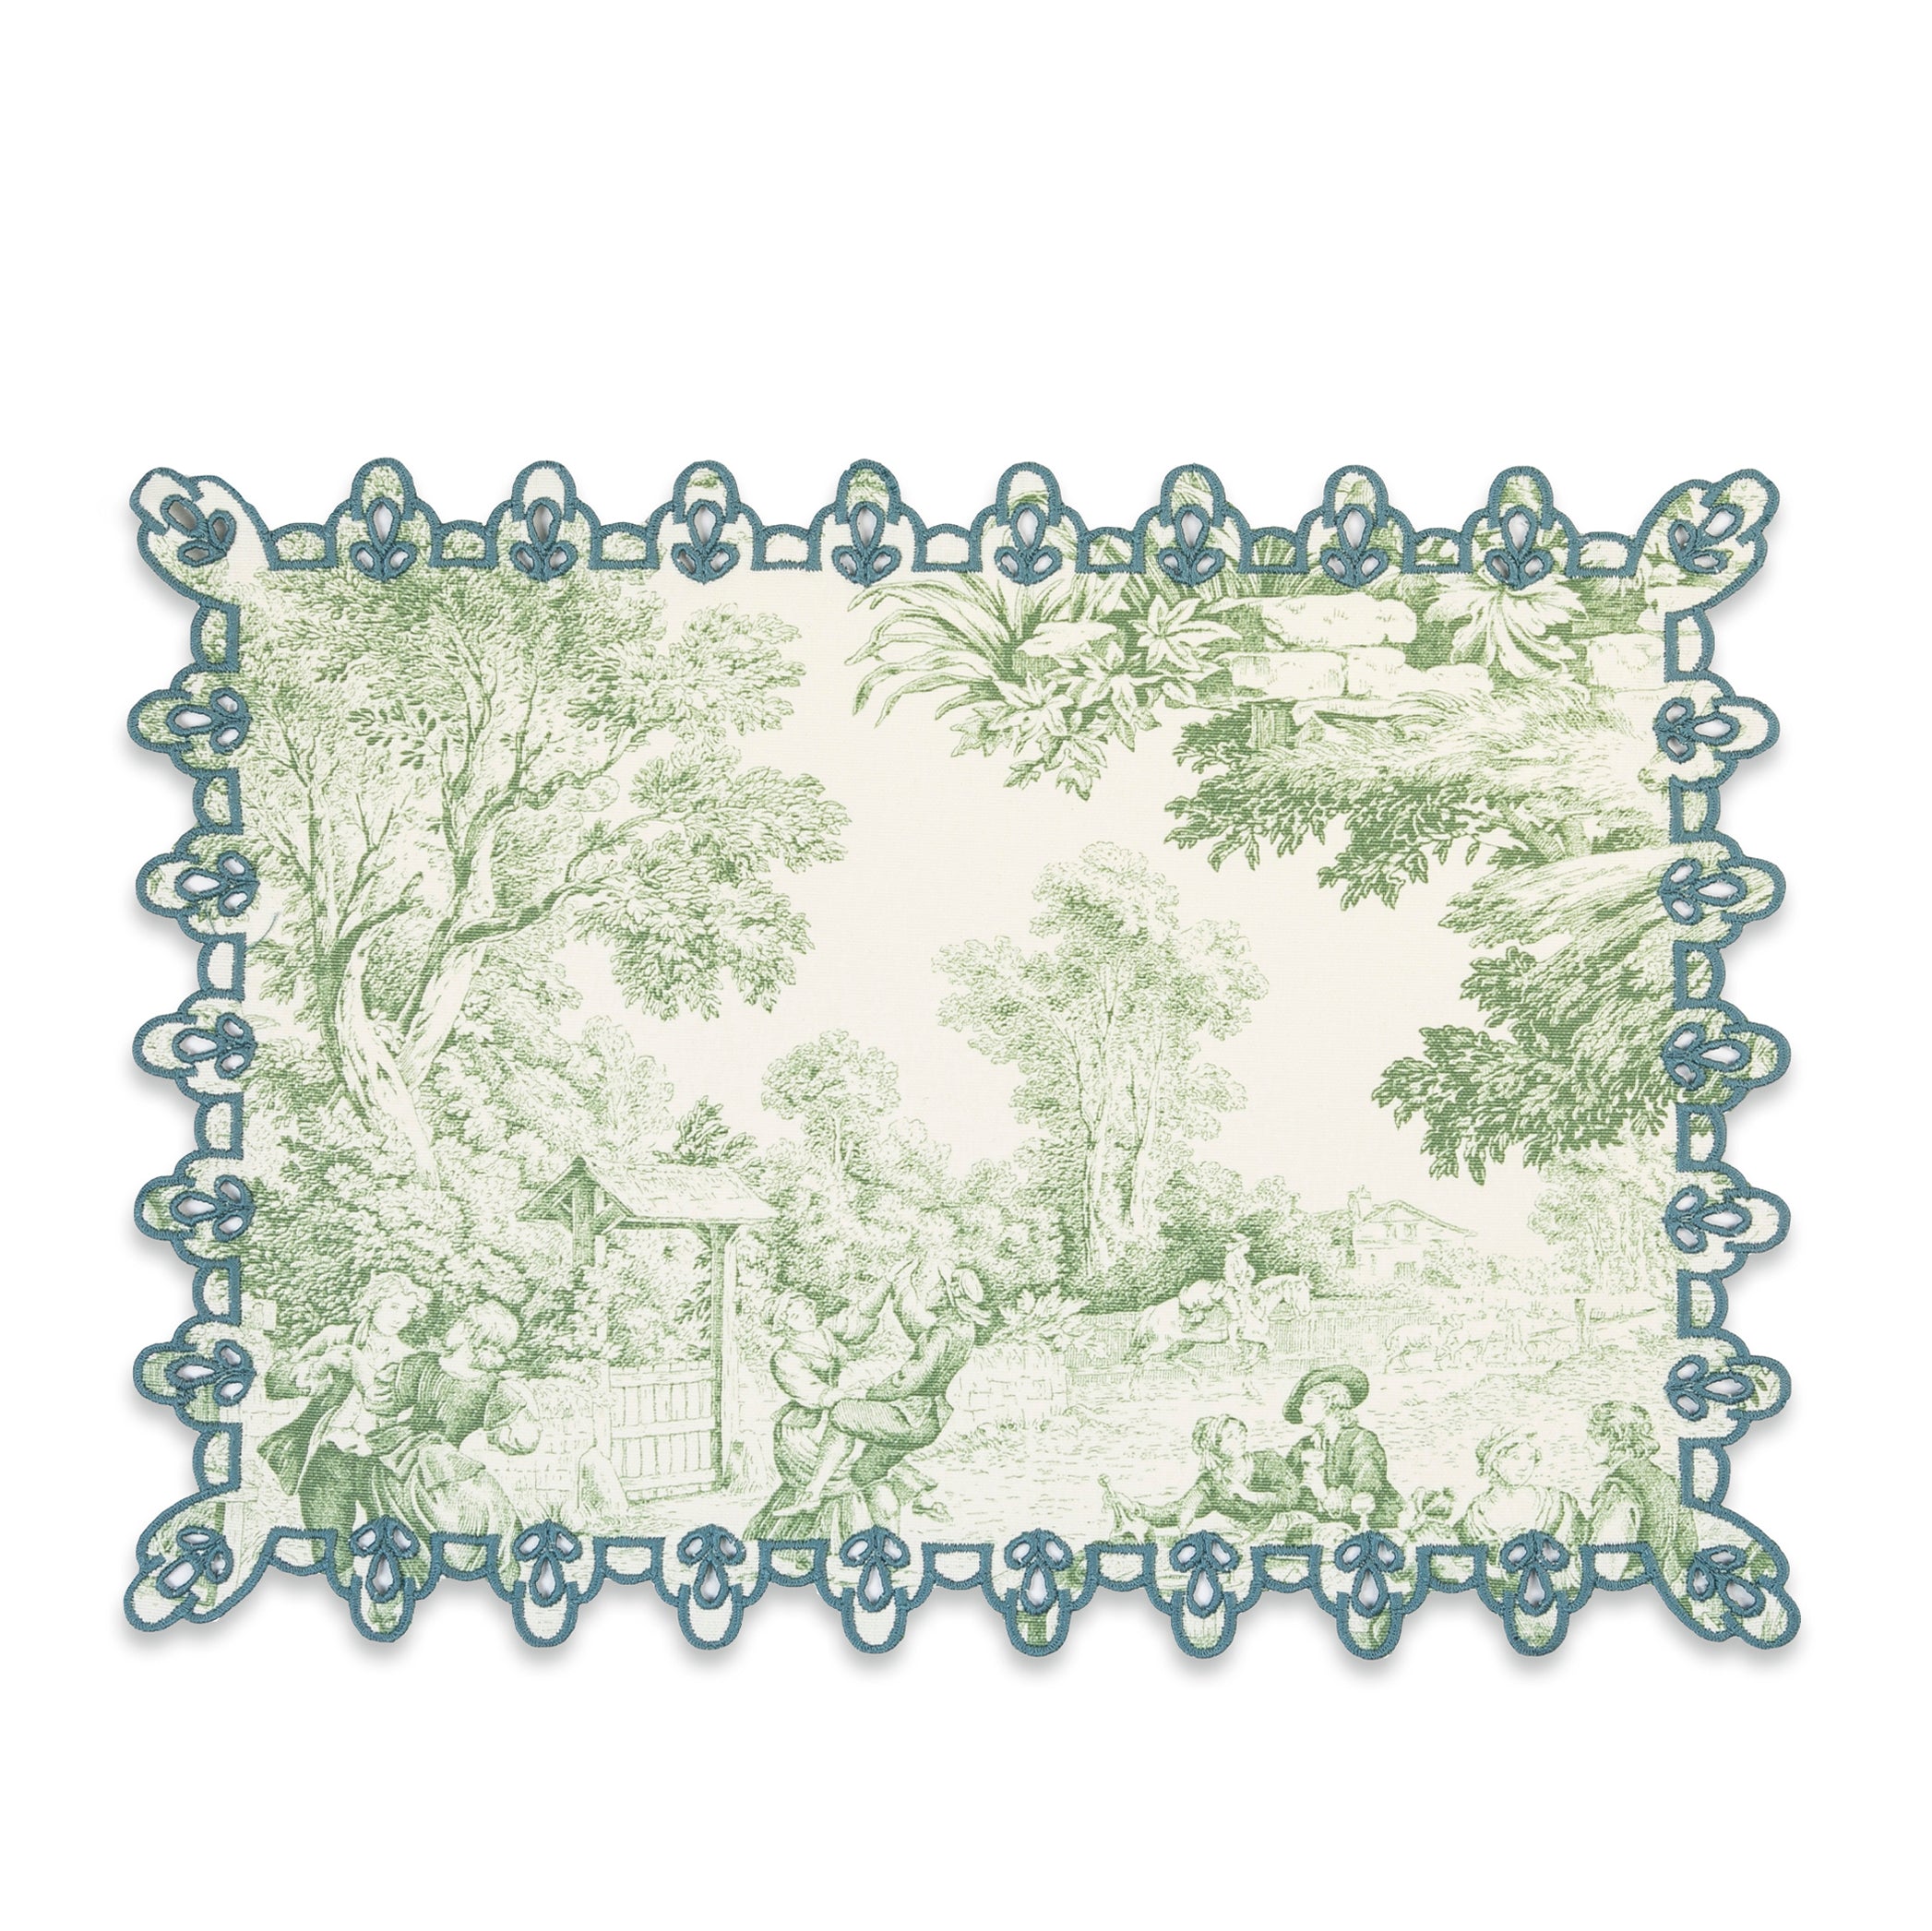 Toile Stain Resistant Cotton Placemat in Blue and Green, 50x35cm